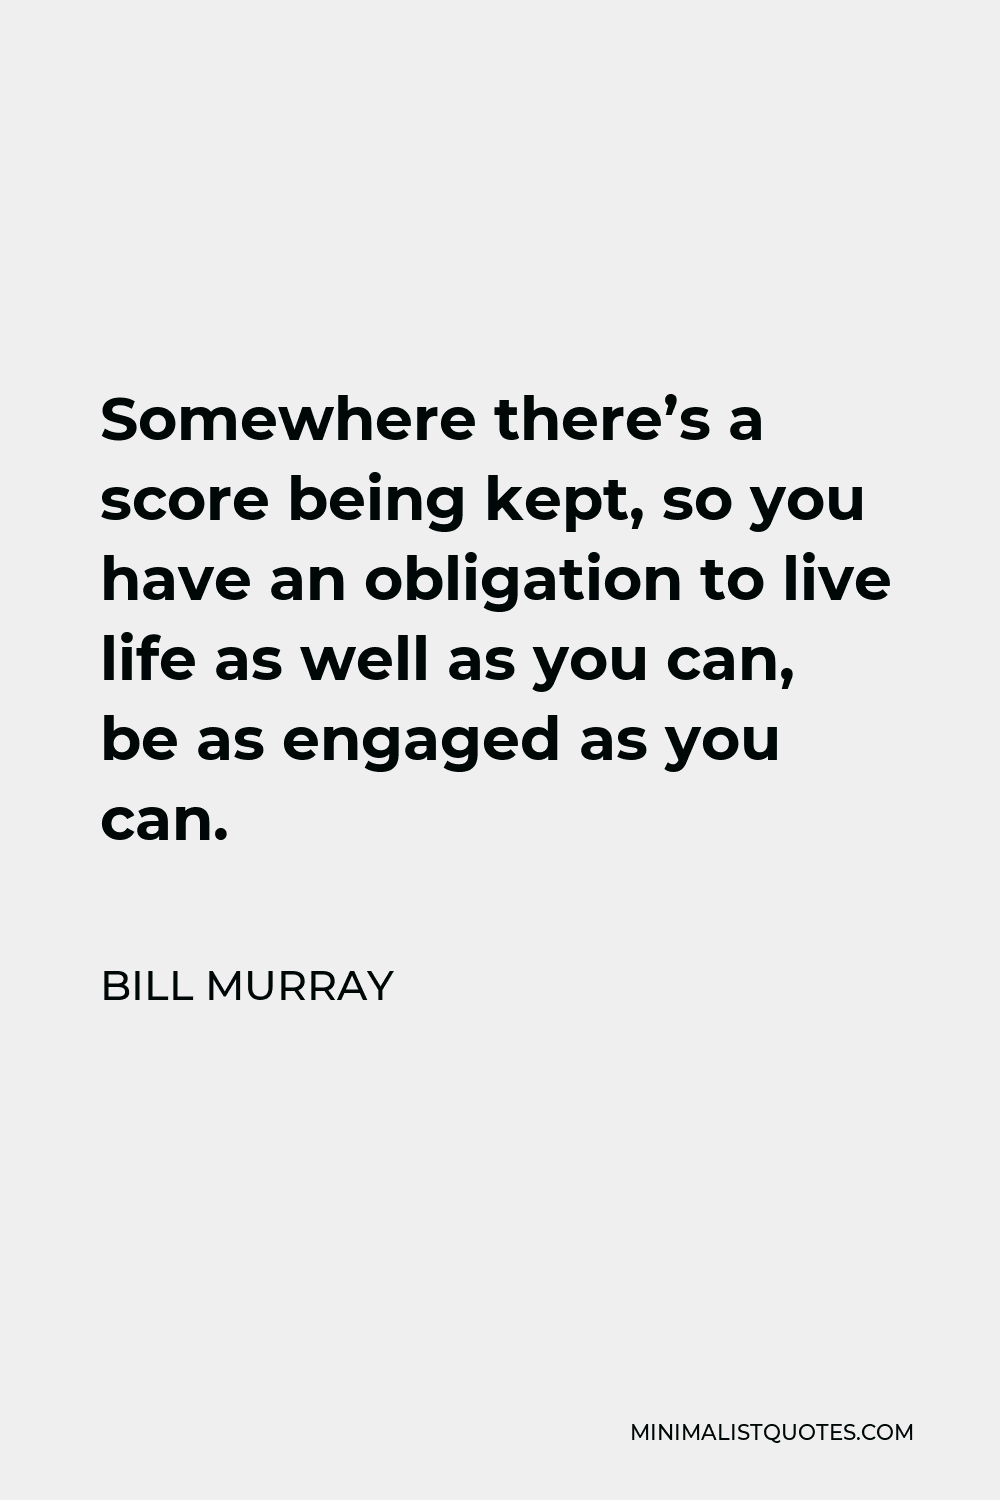 Bill Murray Quote - Somewhere there’s a score being kept, so you have an obligation to live life as well as you can, be as engaged as you can.